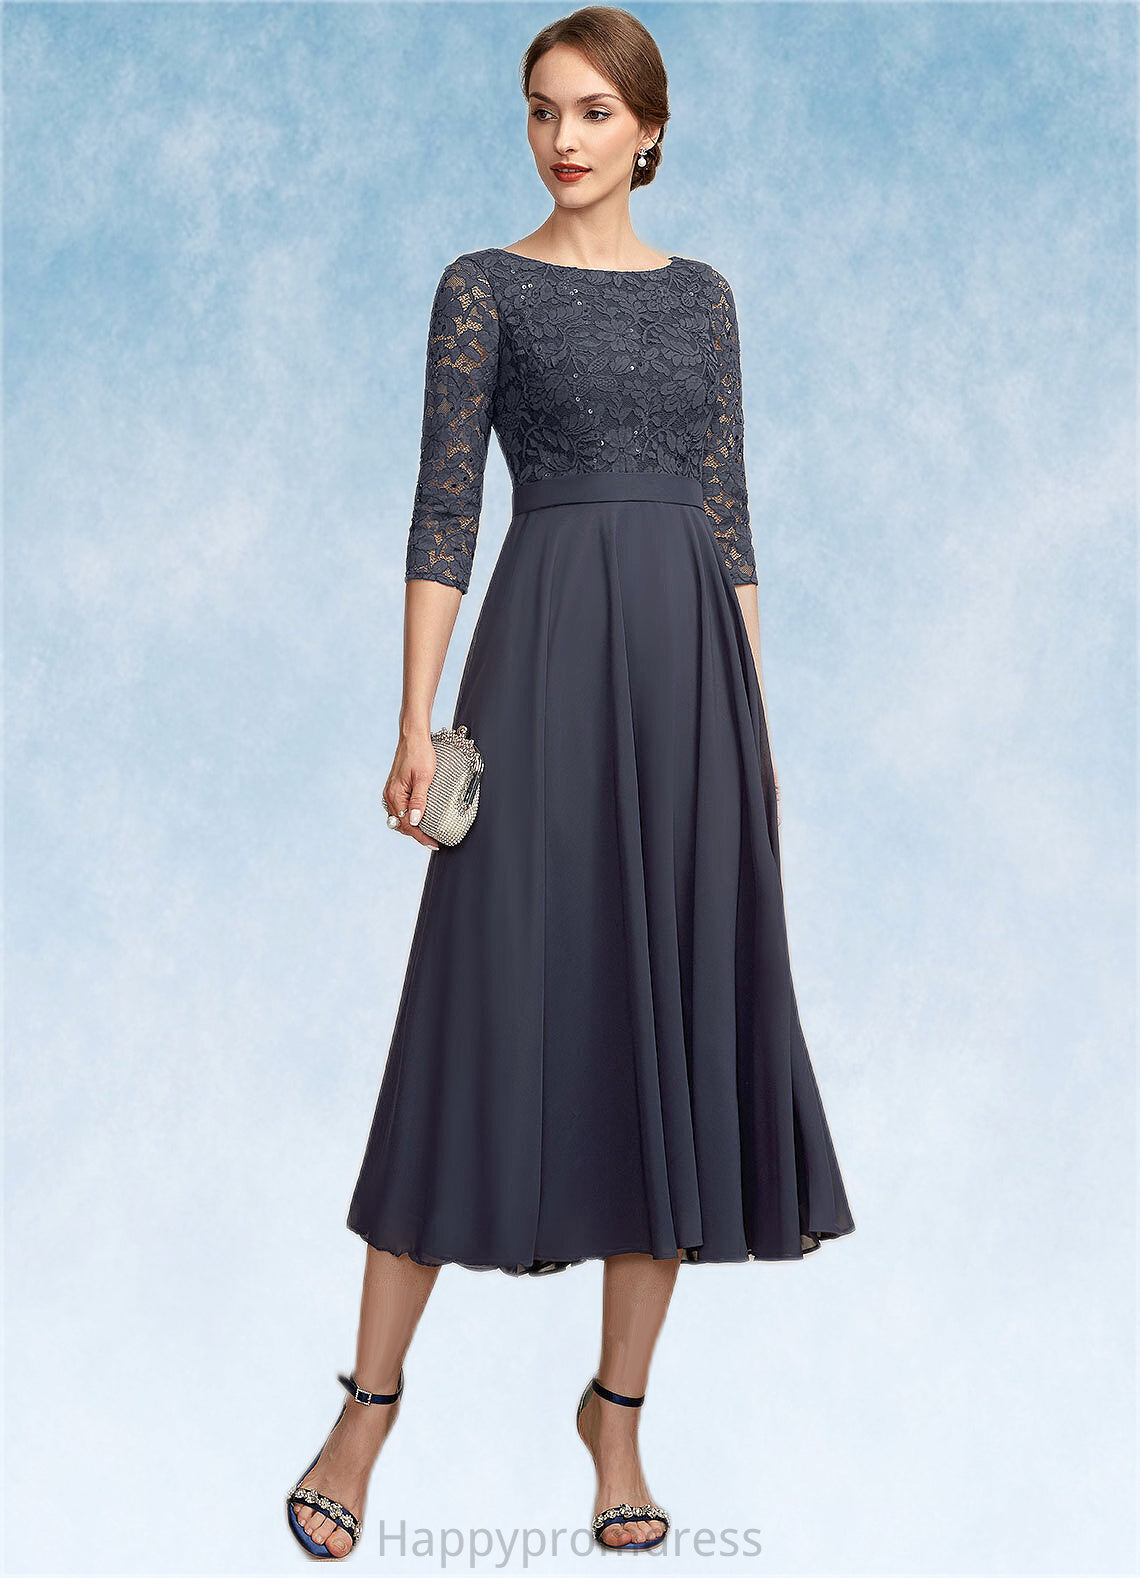 Taylor A-Line Scoop Neck Tea-Length Chiffon Lace Mother of the Bride Dress With Sequins XXS126P0014621